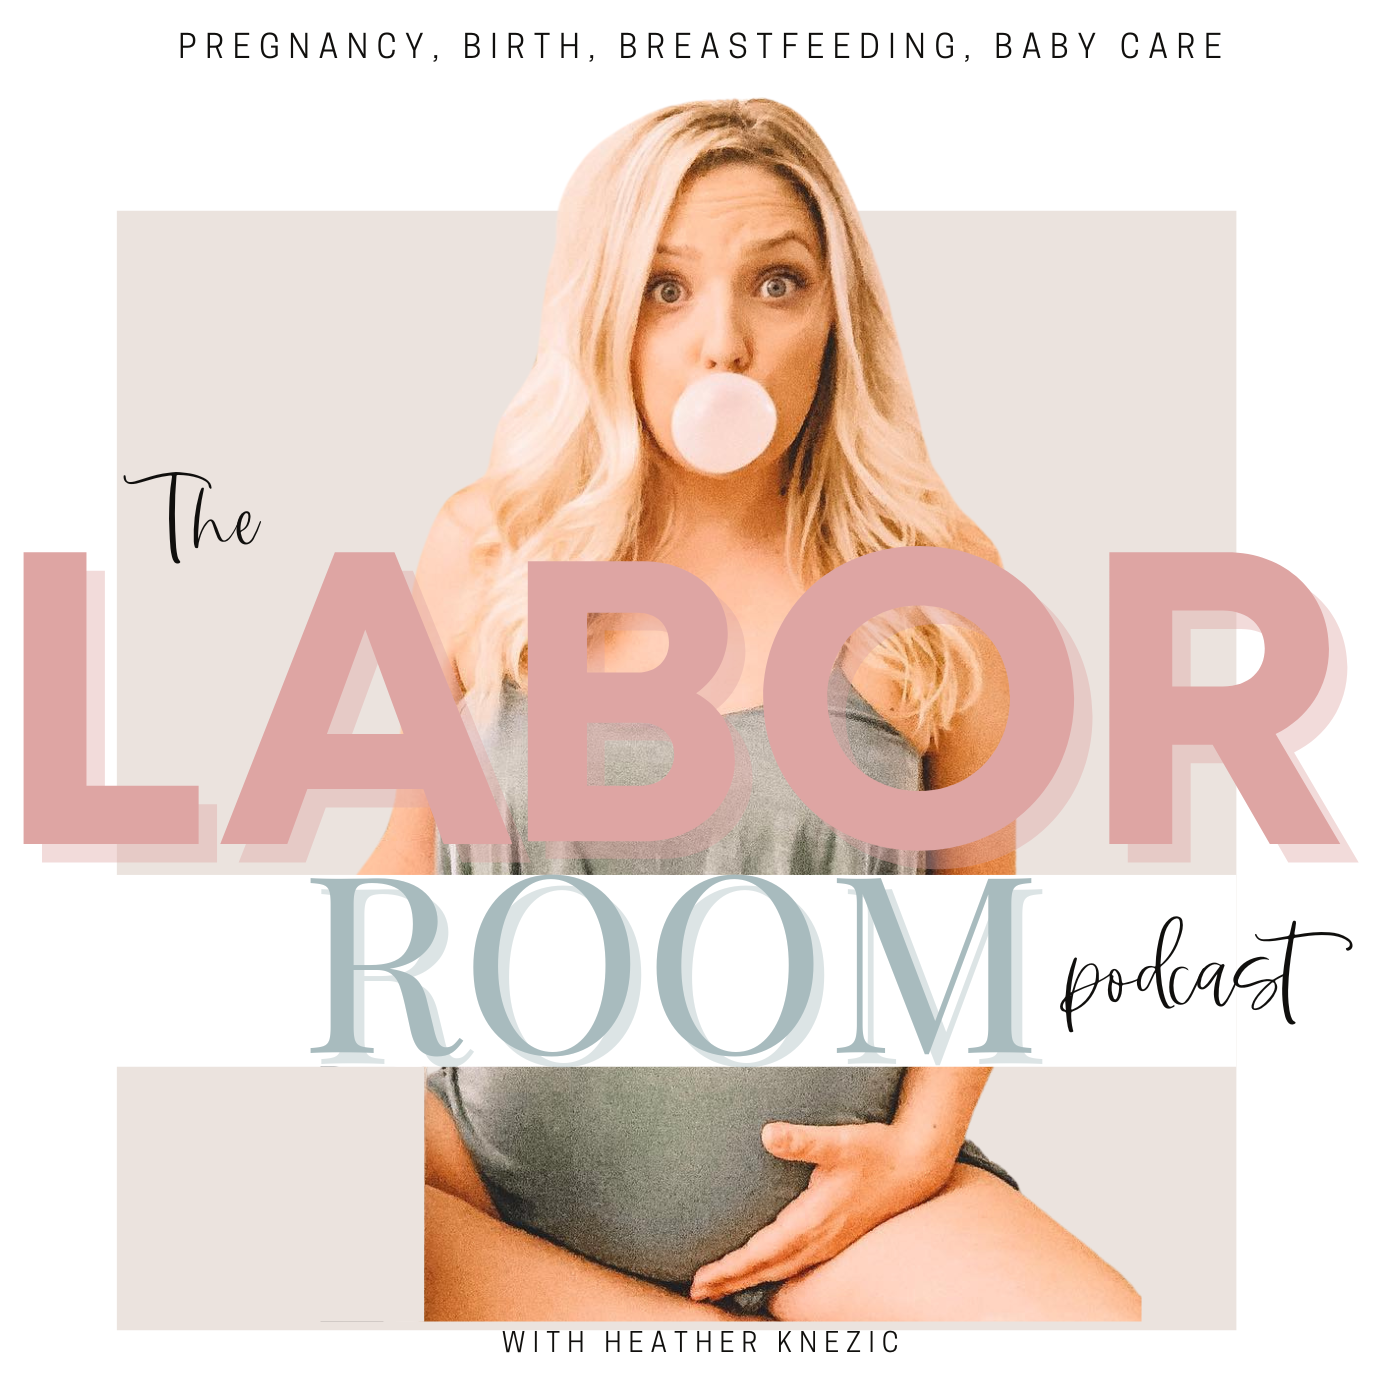 Top 5 Most Frequently Asked Questions as A Labor & Delivery Nurse